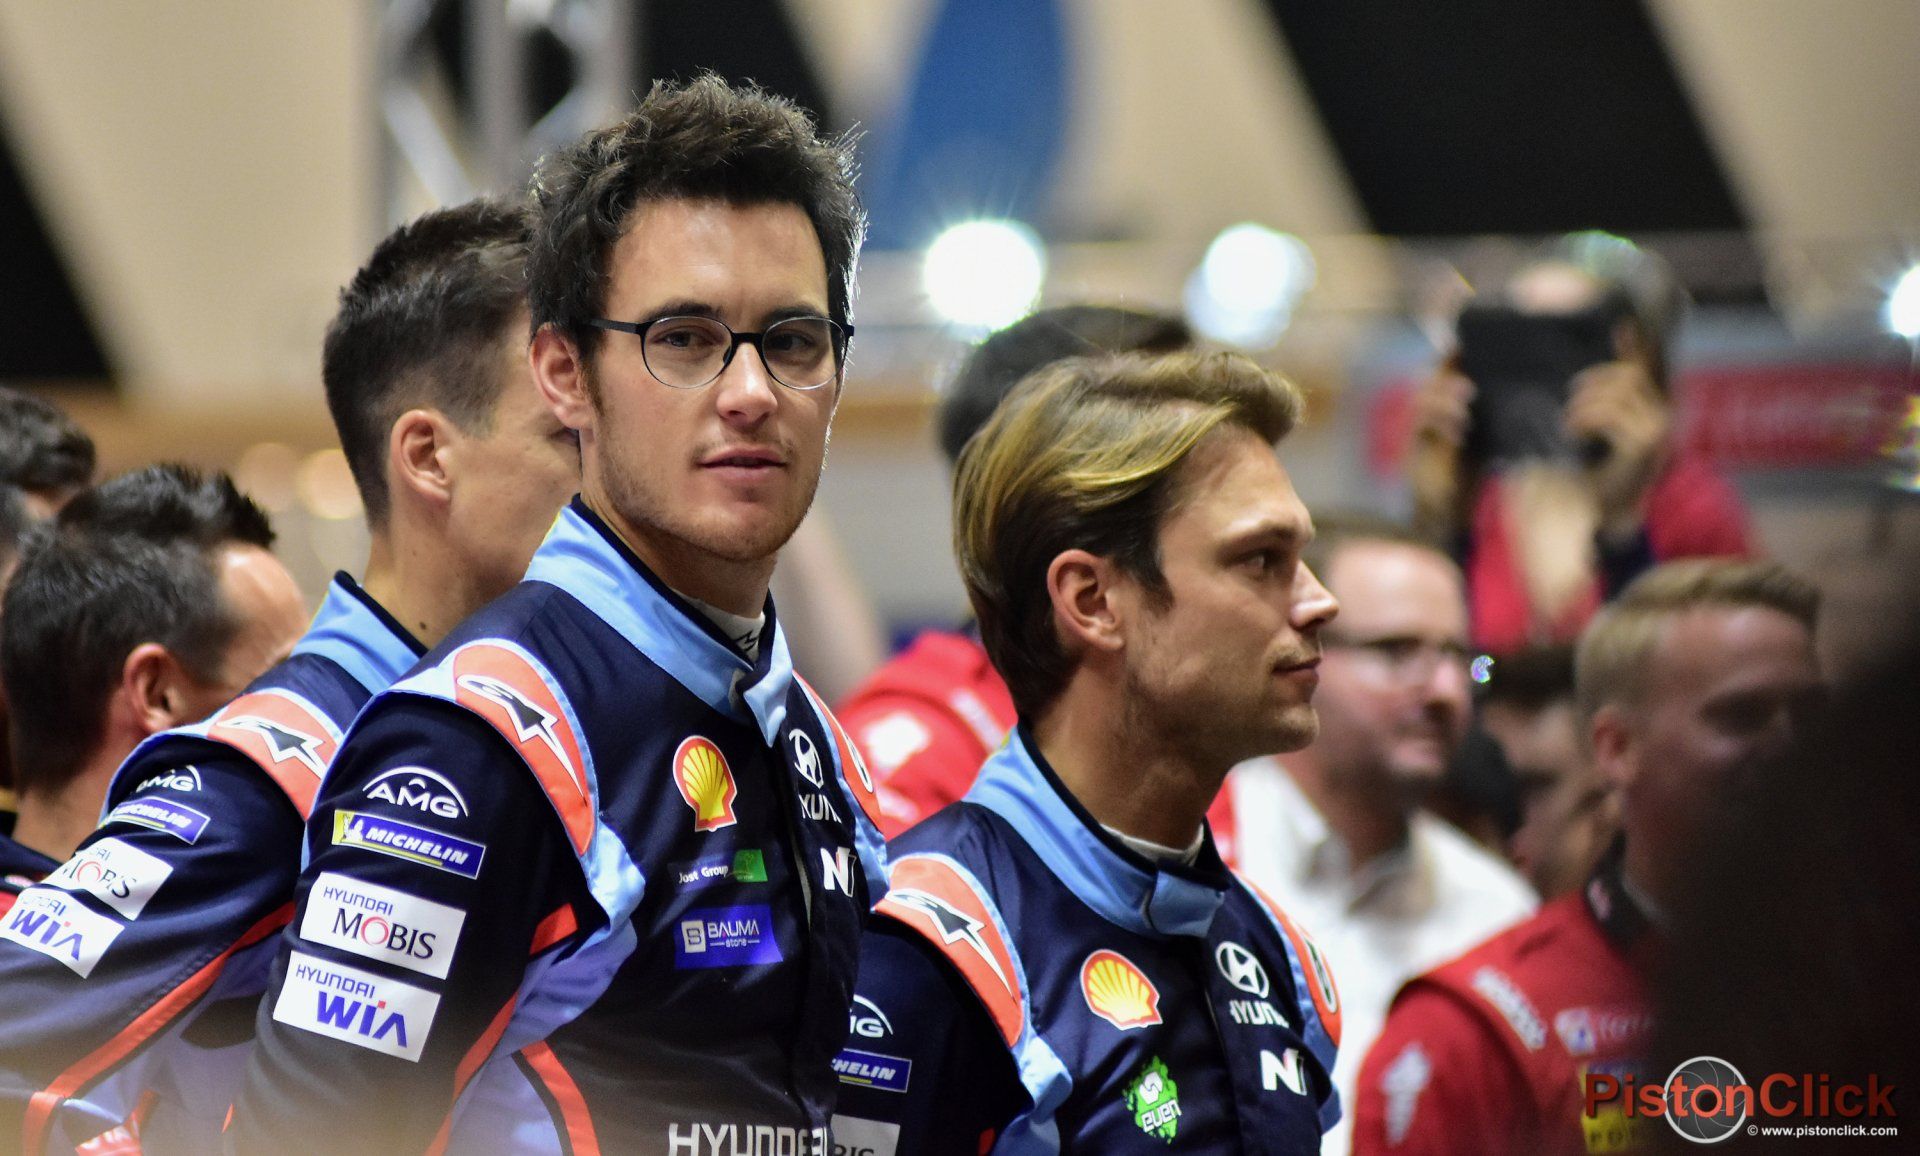 Thierry Neuville WRC